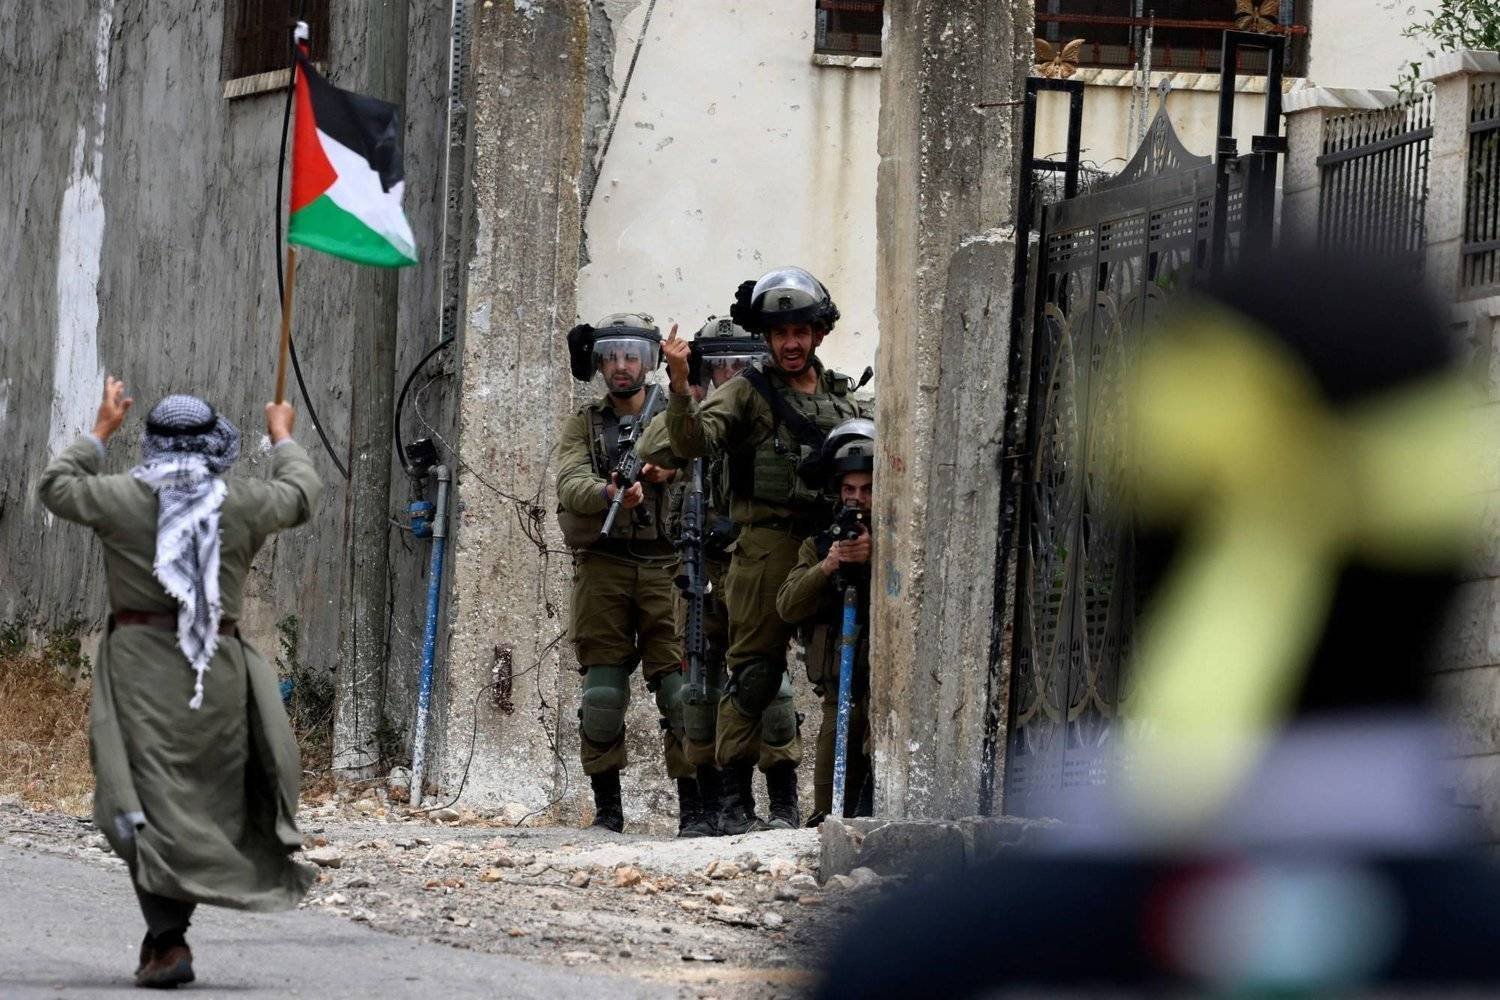 A demonstrator brandishing a Palestinian national flag walks past Israeli troops, during confrontations with them following a protest against the expropriation of Palestinian land by Israel in the occupied-West Bank, in the village of Kfar Qaddum, near the Jewish settlement of Kedumim, on June 9, 2023. (Photo by Jaafar ASHTIYEH / AFP)
